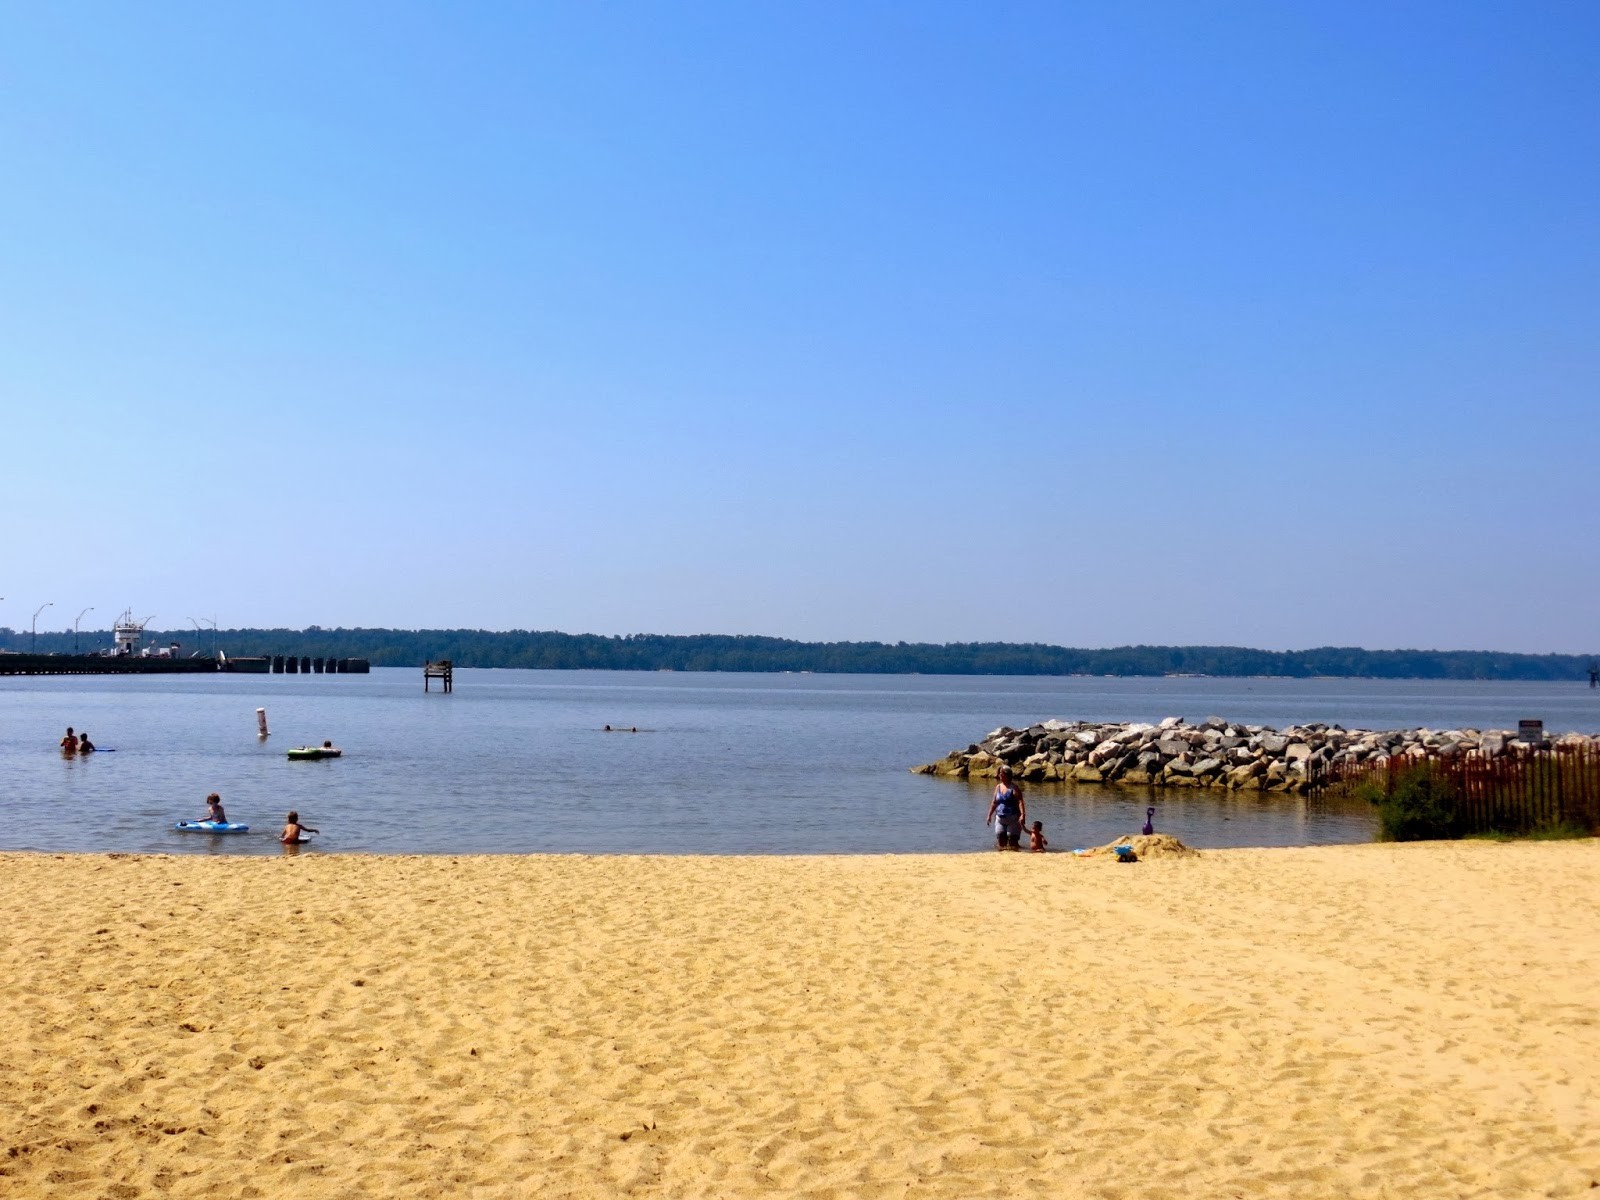 Jamestown Beach closed until mid May for improvements - The Virginia